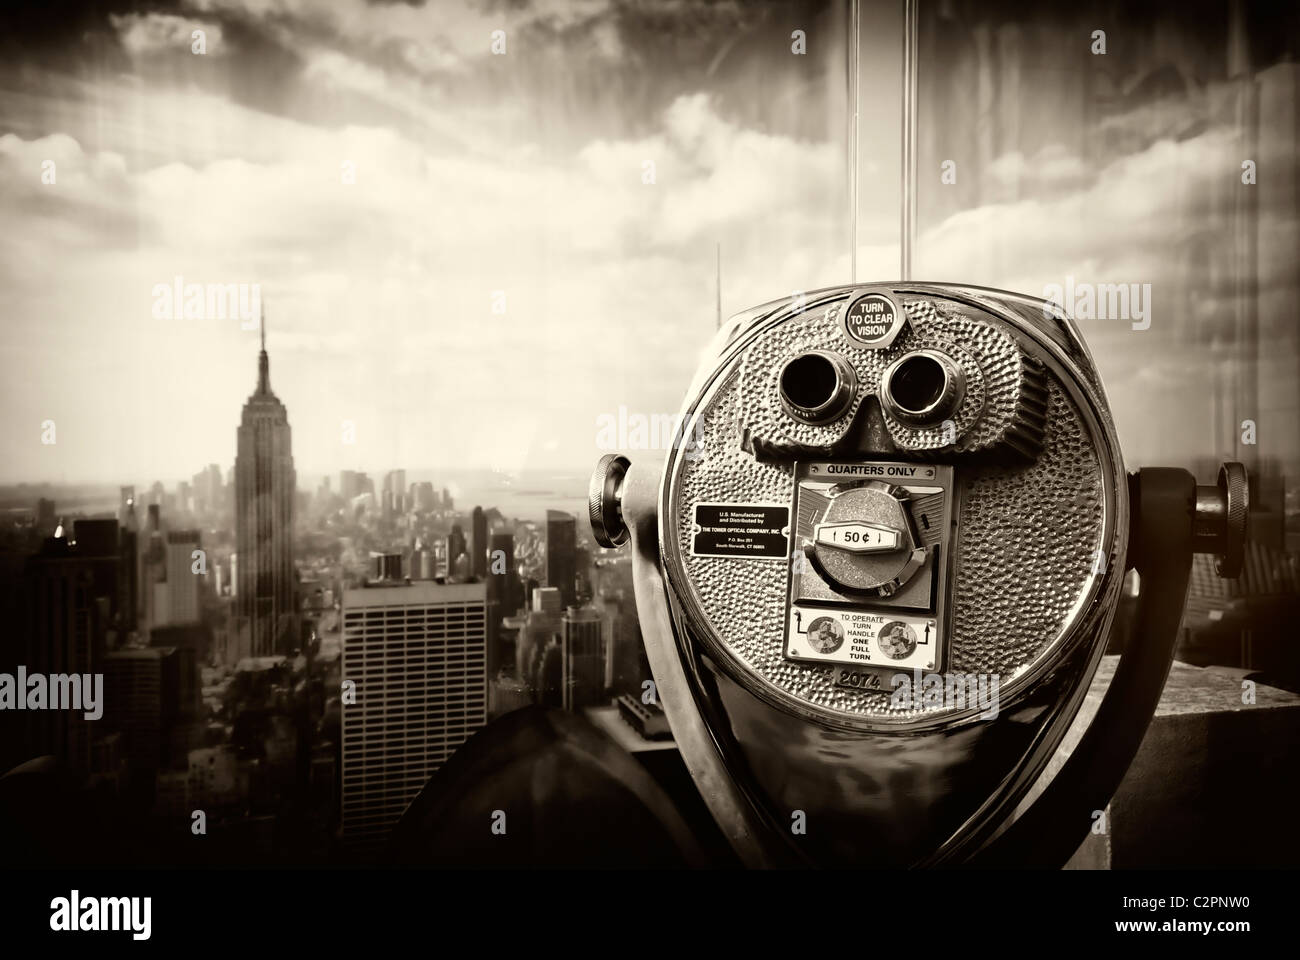 Viewing Binoculars coin operated, Observation Deck view, Top of the Rock, 30 Rockefeller Center & Empire State Building NYC 2011 Stock Photo